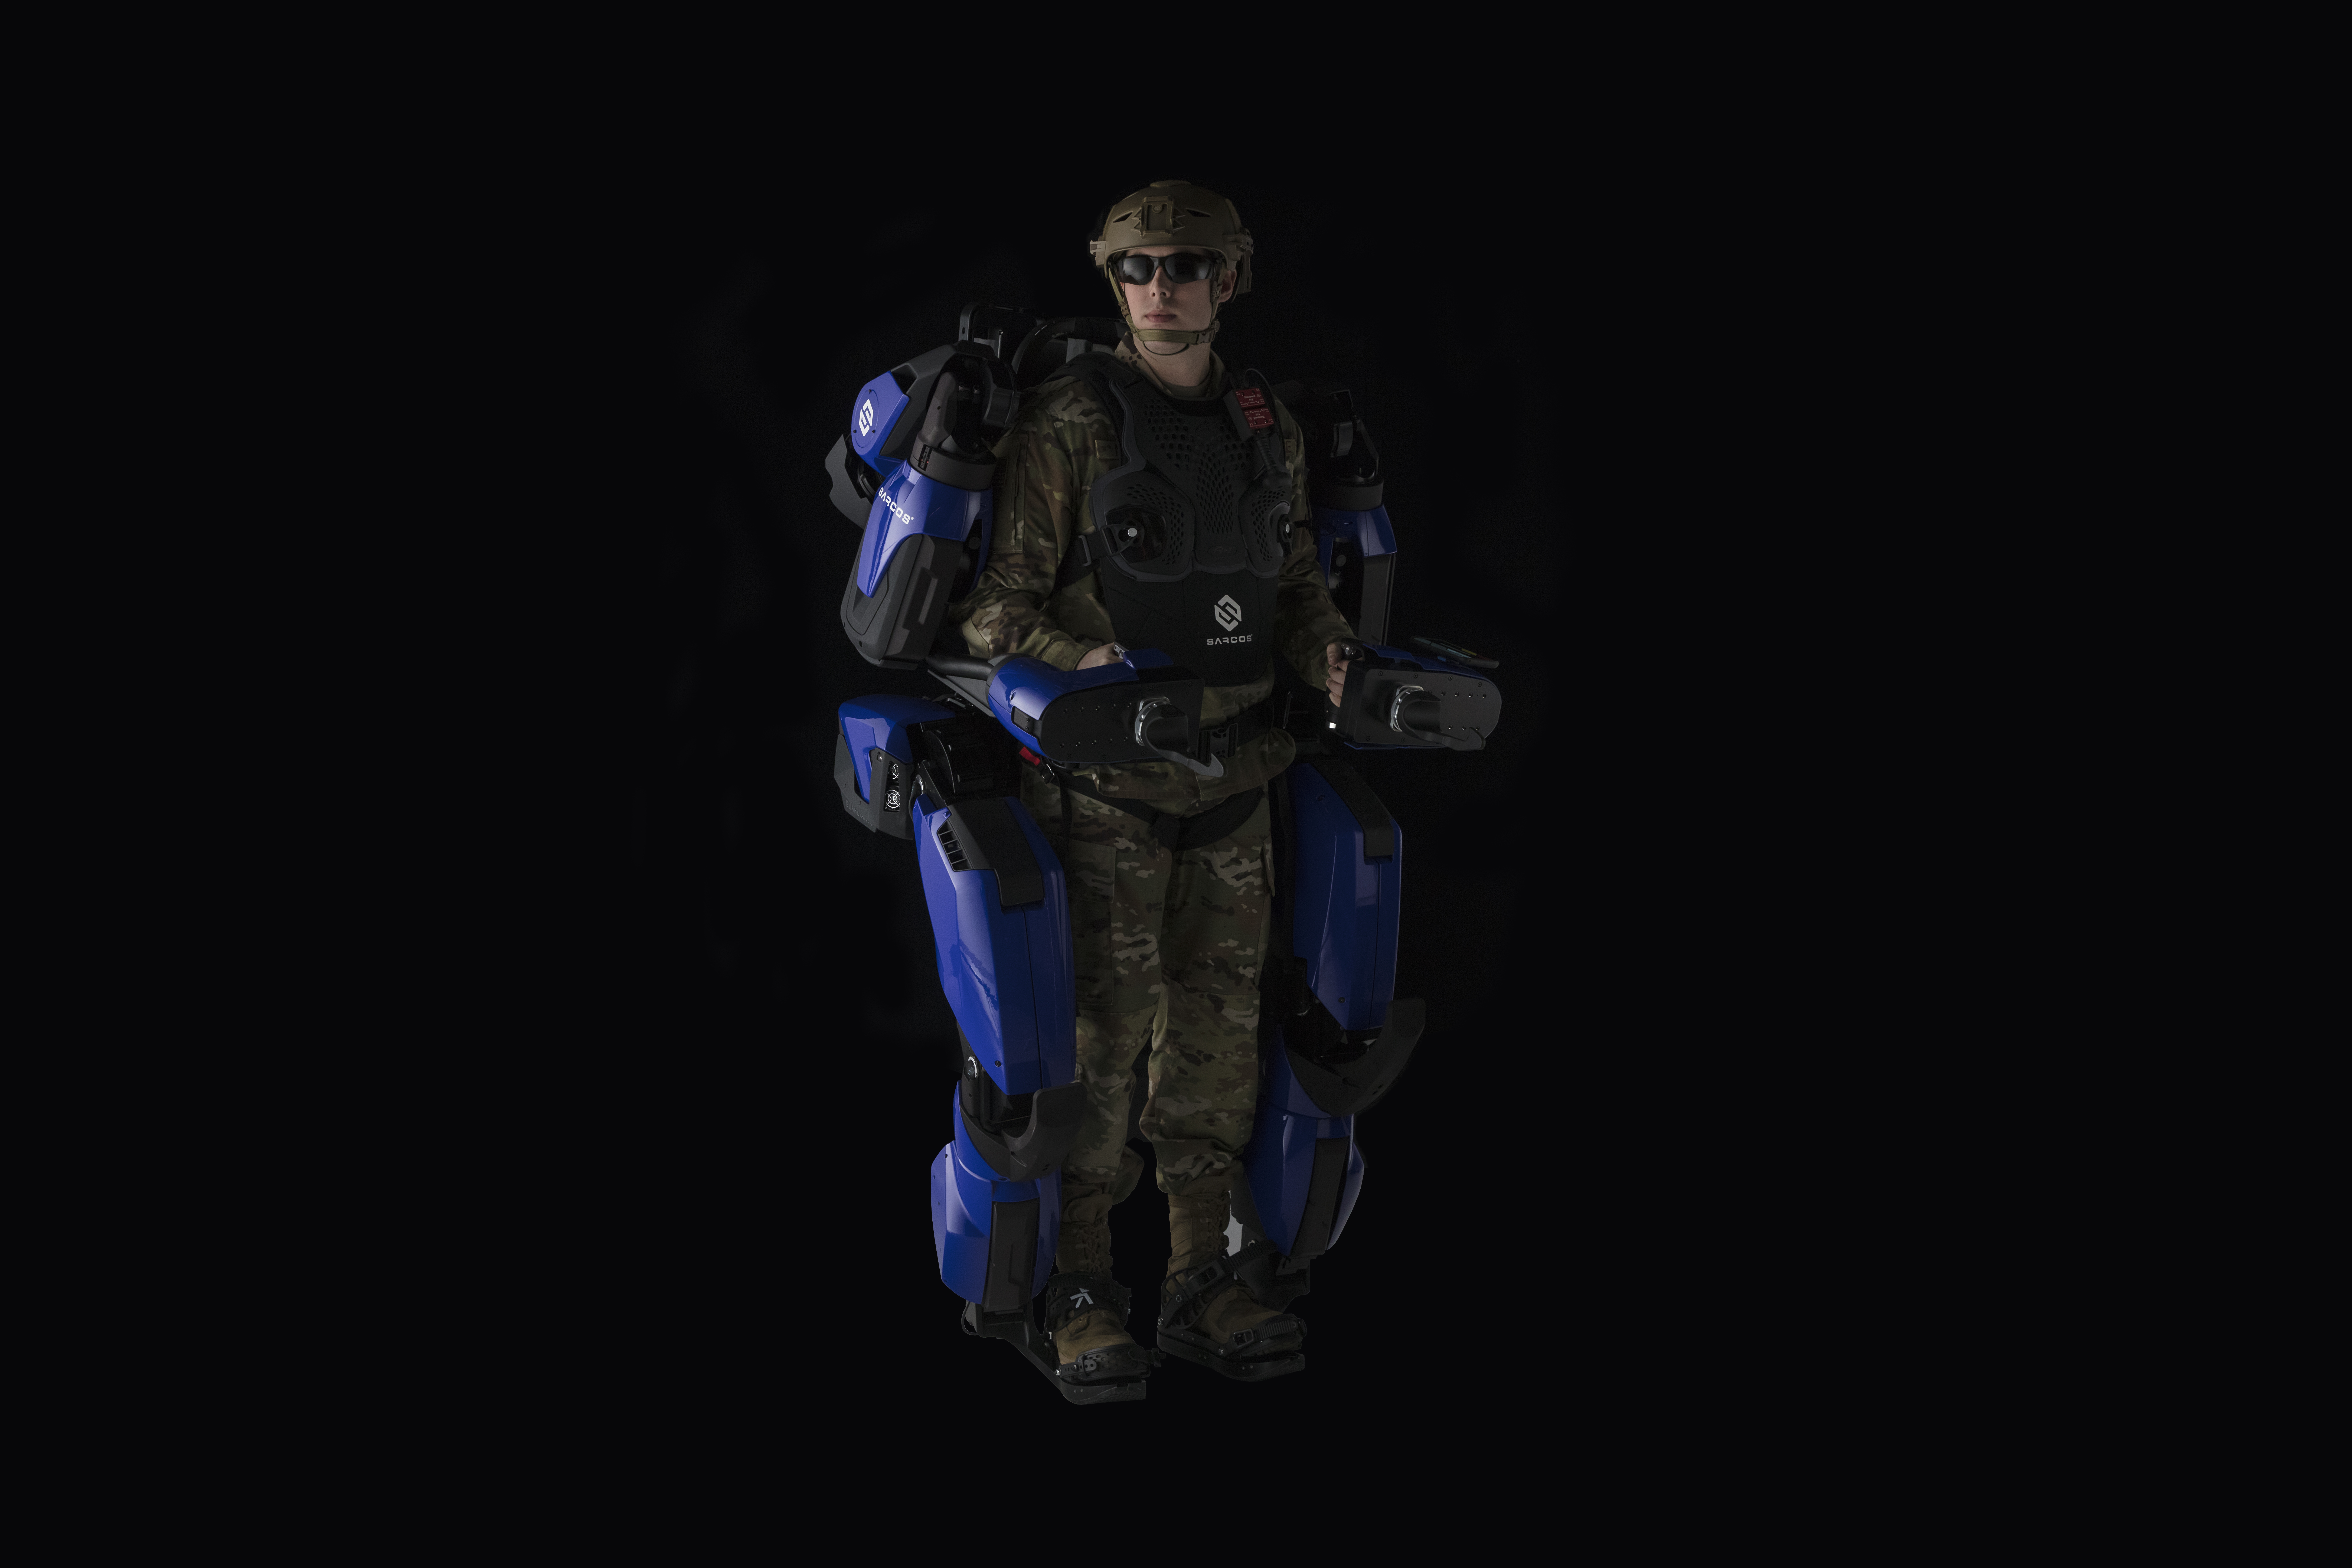 Sarcos Defense wins Marine Corps contract for Alpha version of Guardian XO exoskeleton